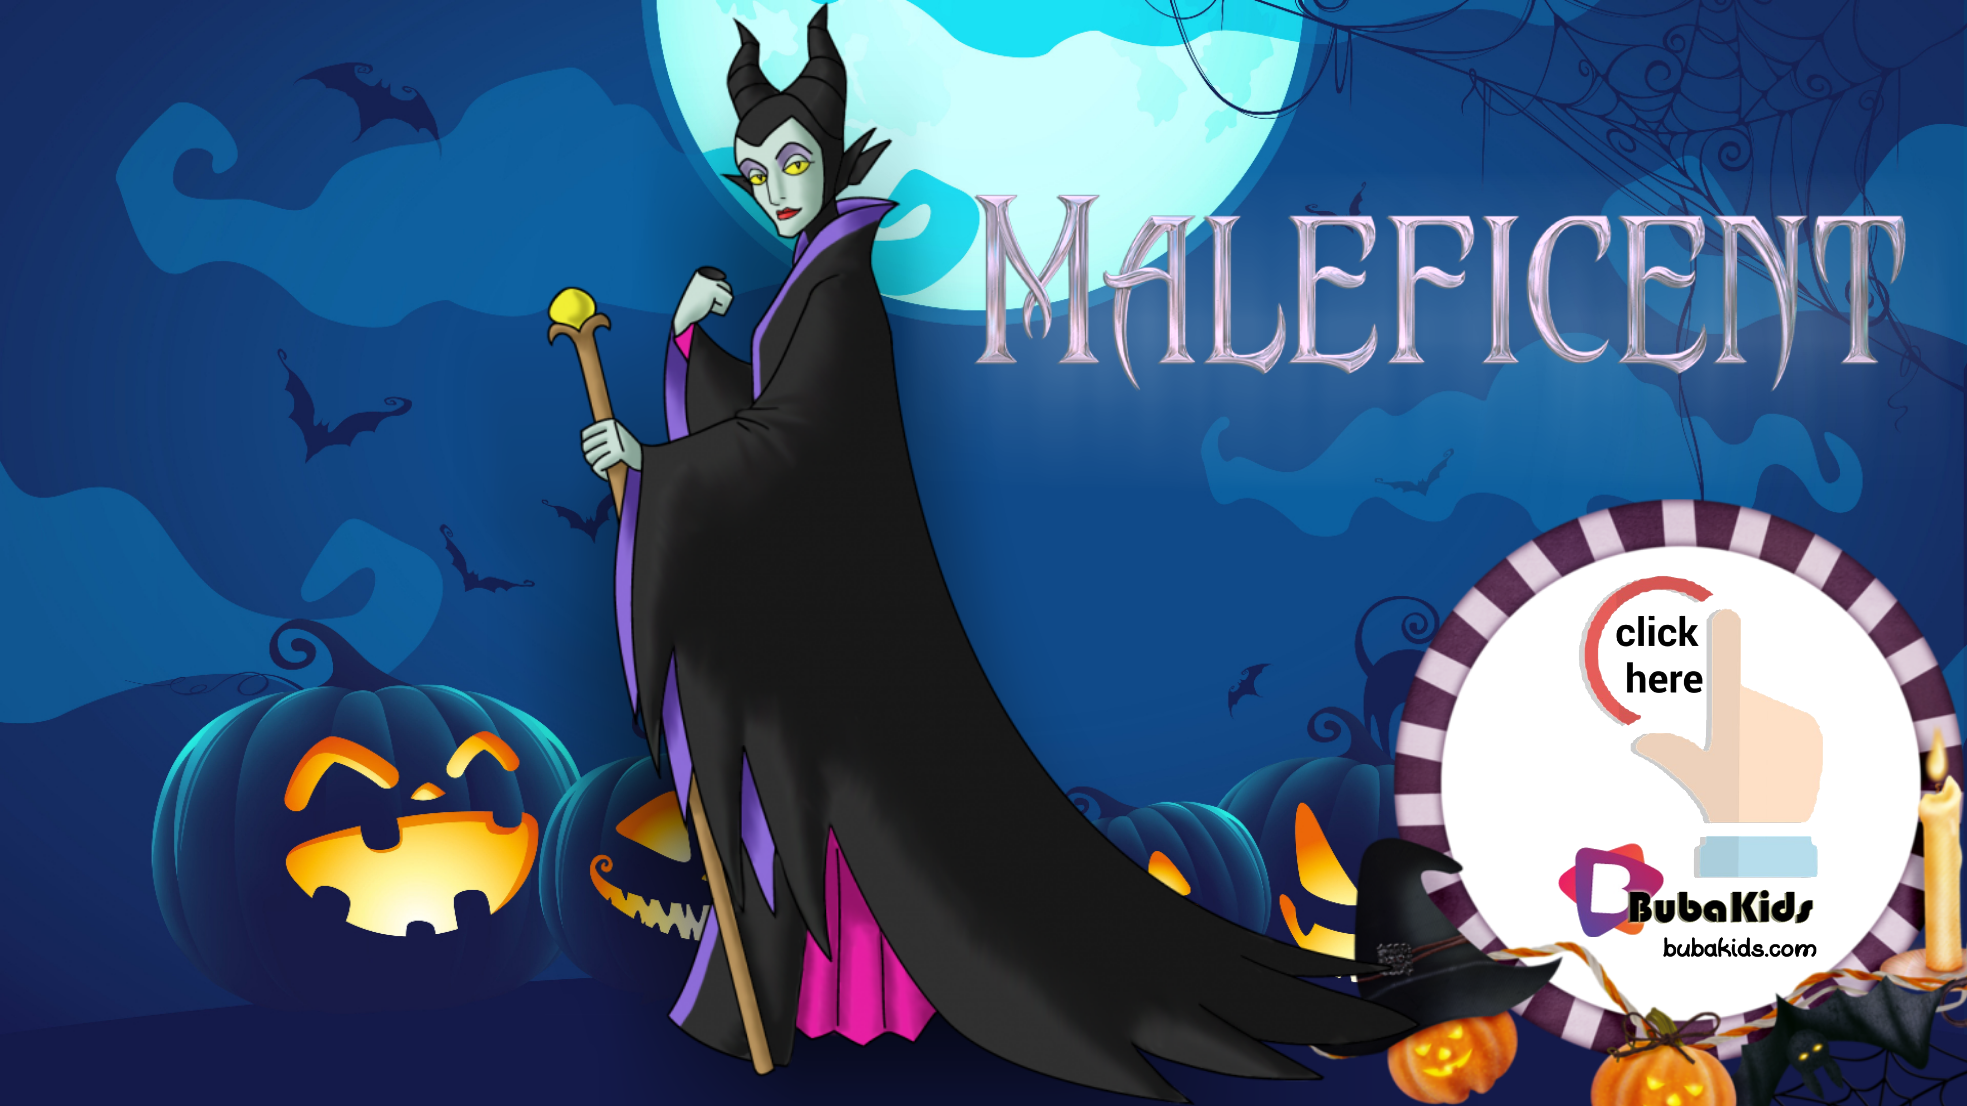 Maleficent halloween invitation template free and printable. Wallpaper